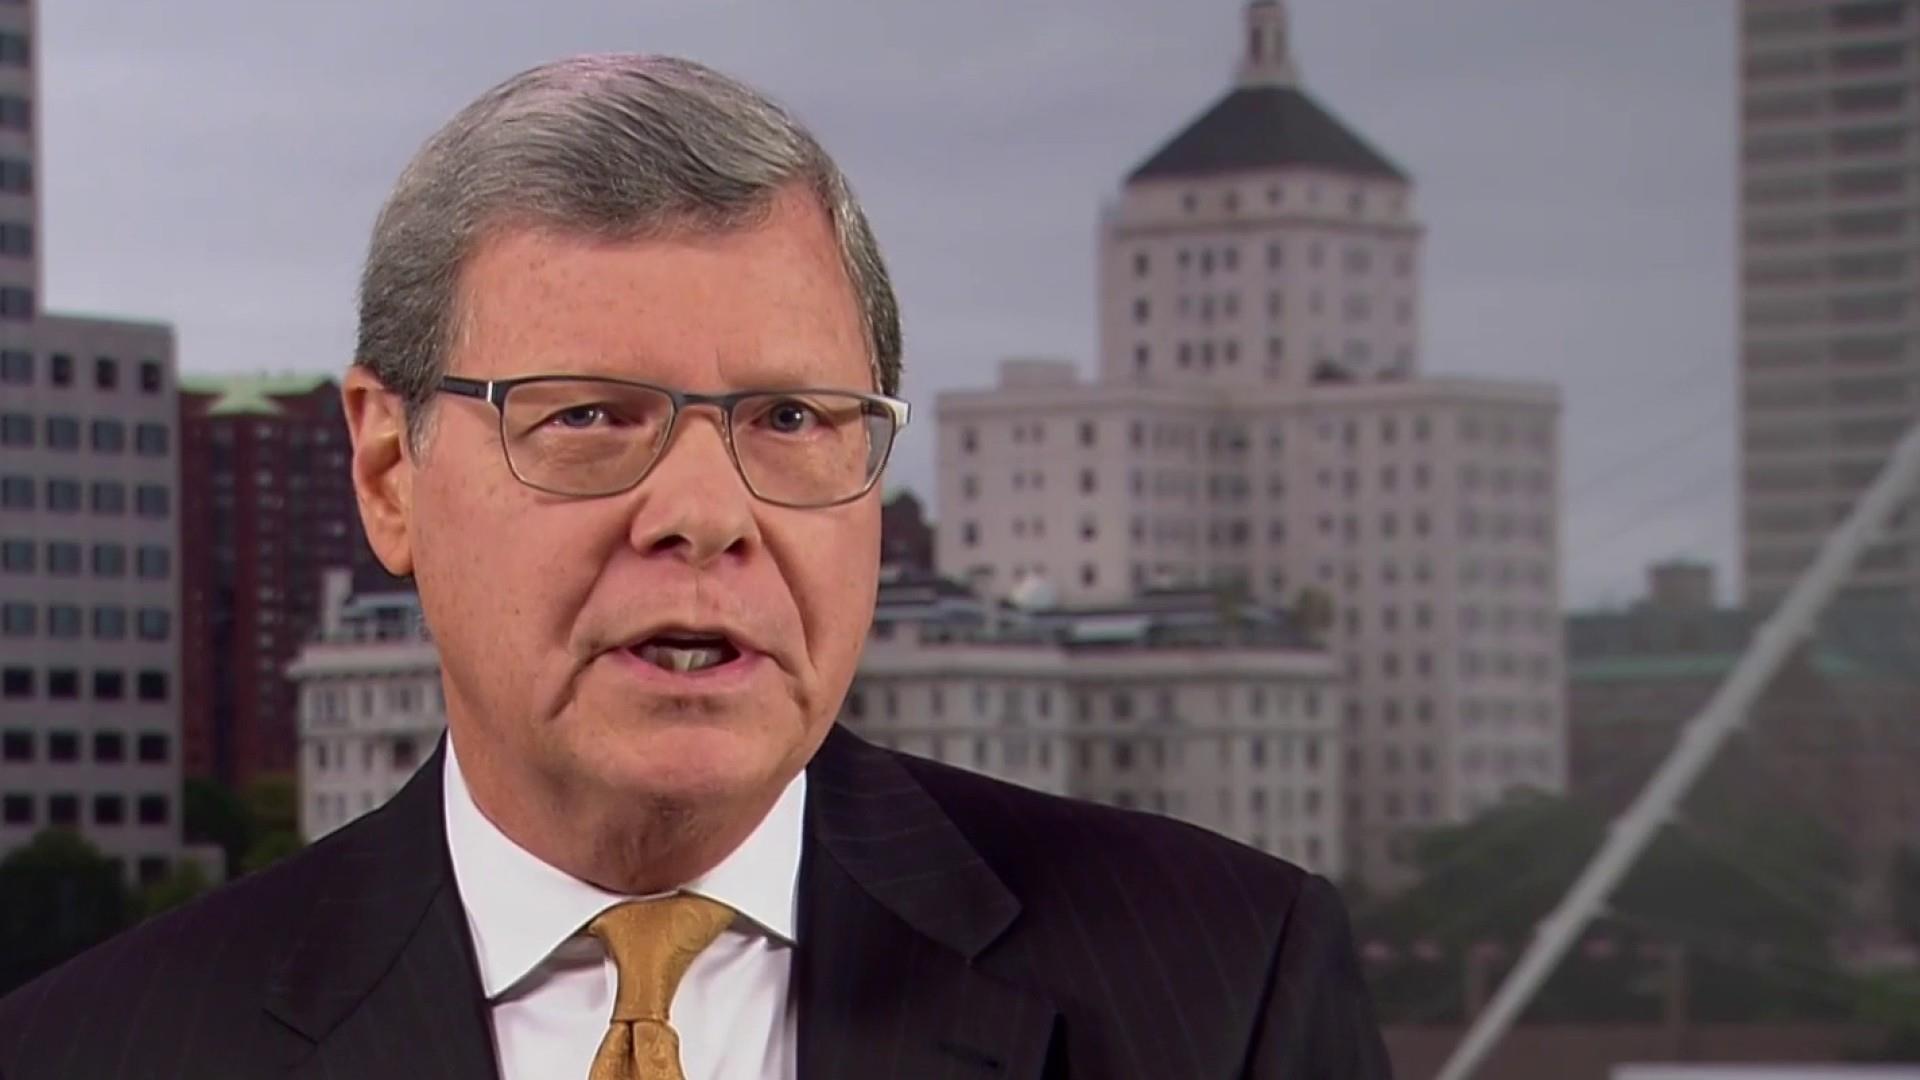 Charlie Sykes: 'I'm used to being disappointed' in Congress